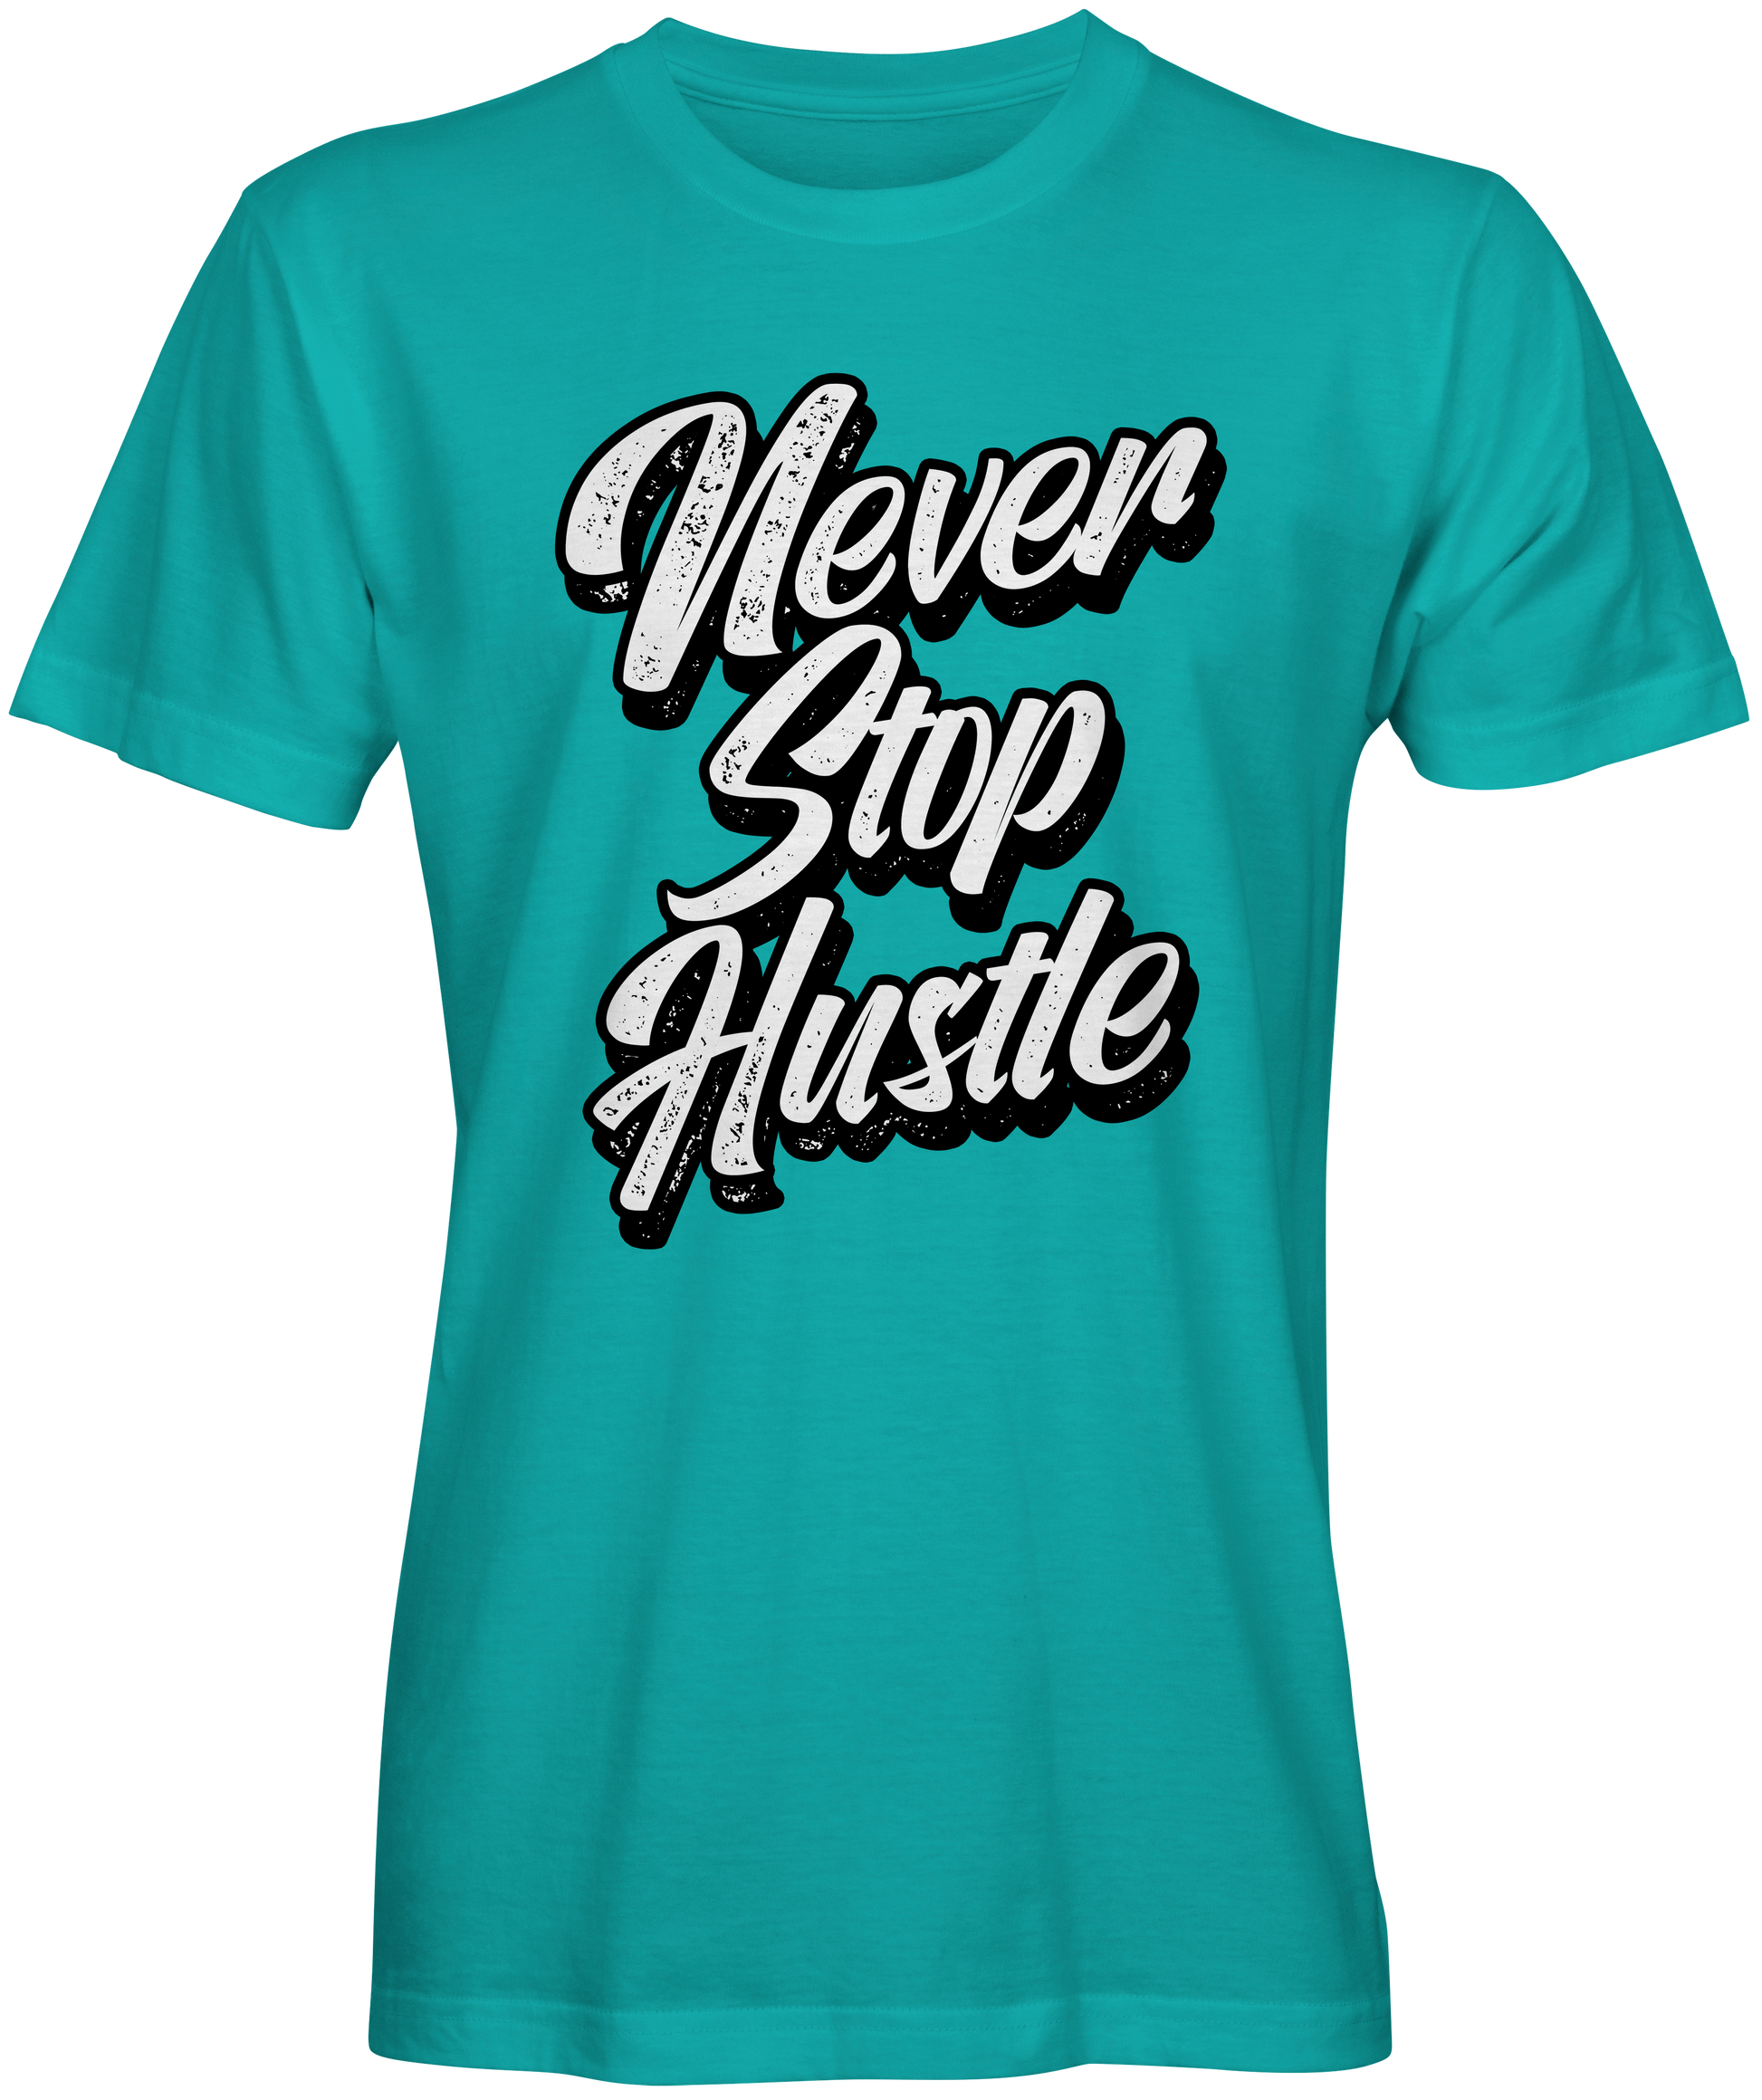 Never Stop Hustle T-shirt for Sale